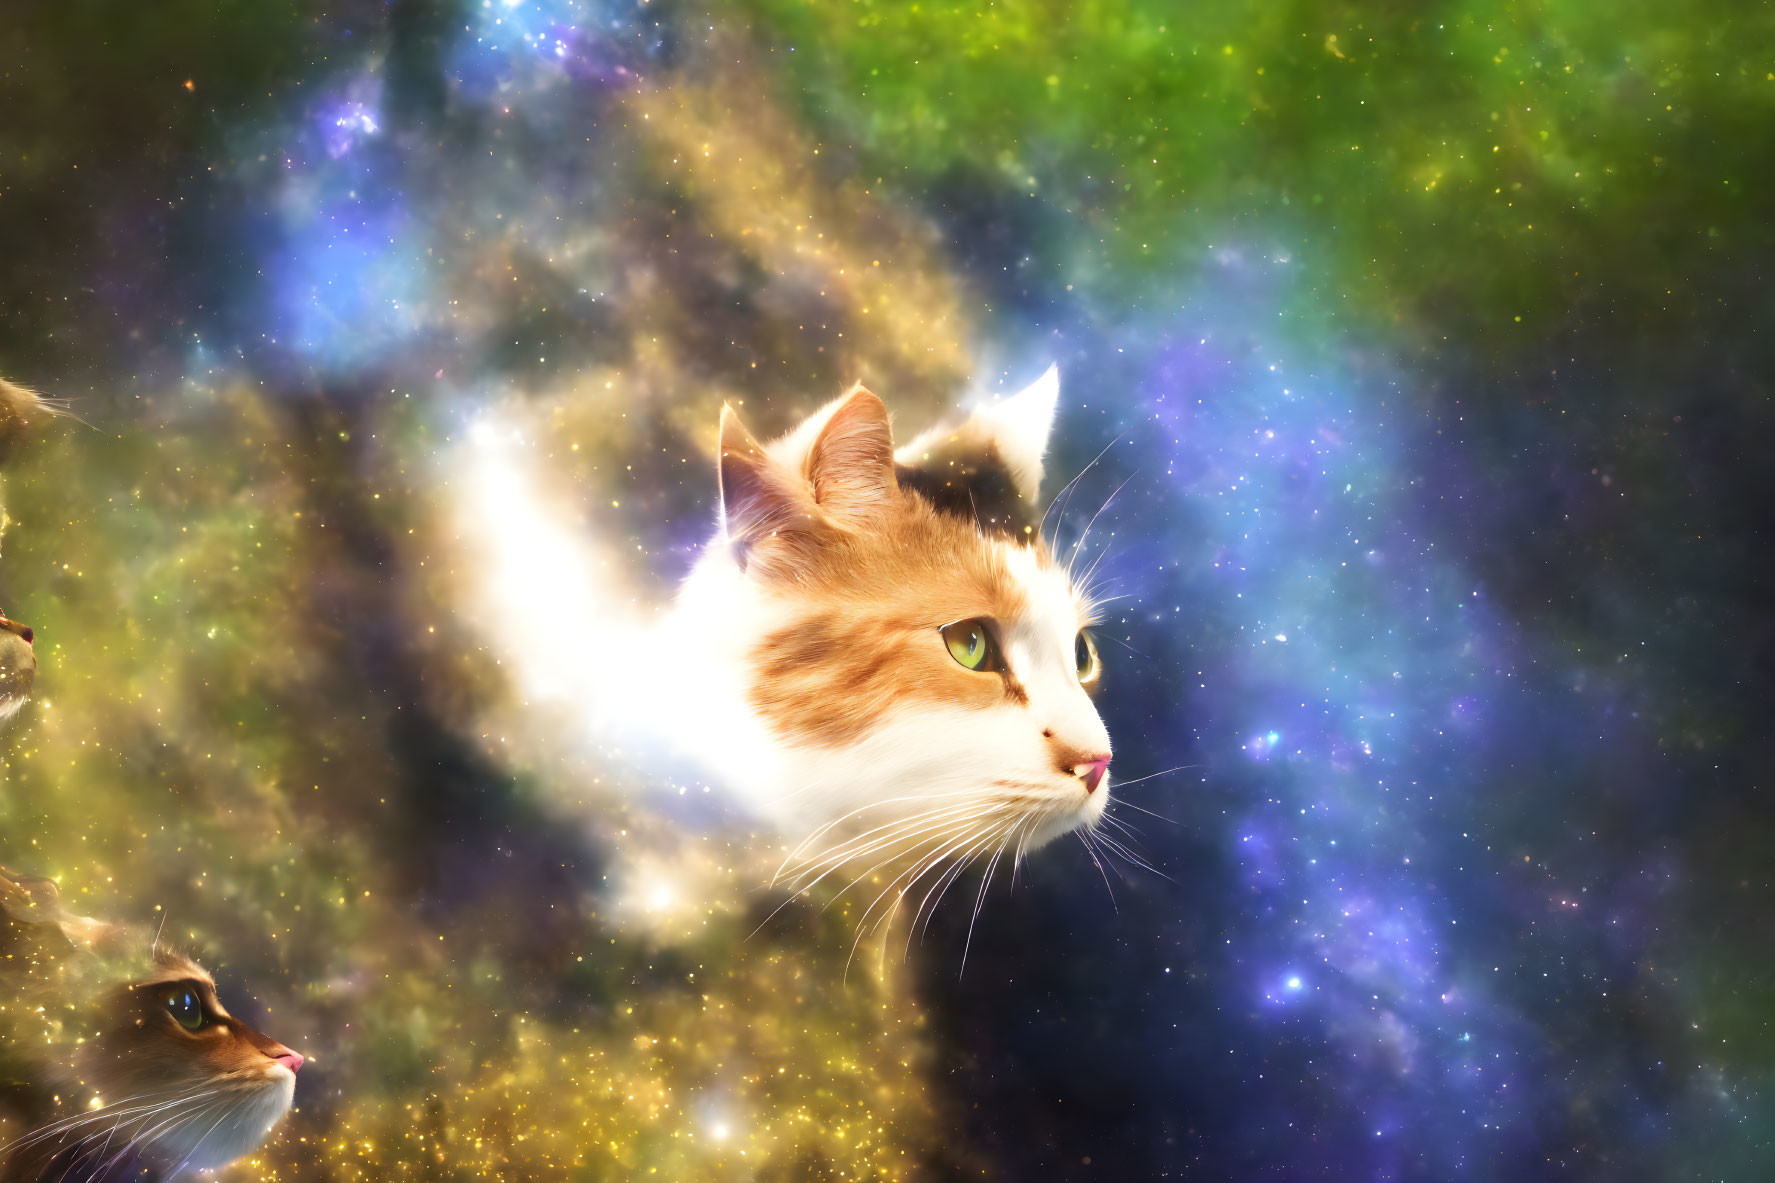 Cat's face blended with cosmic background: surreal feline portrait